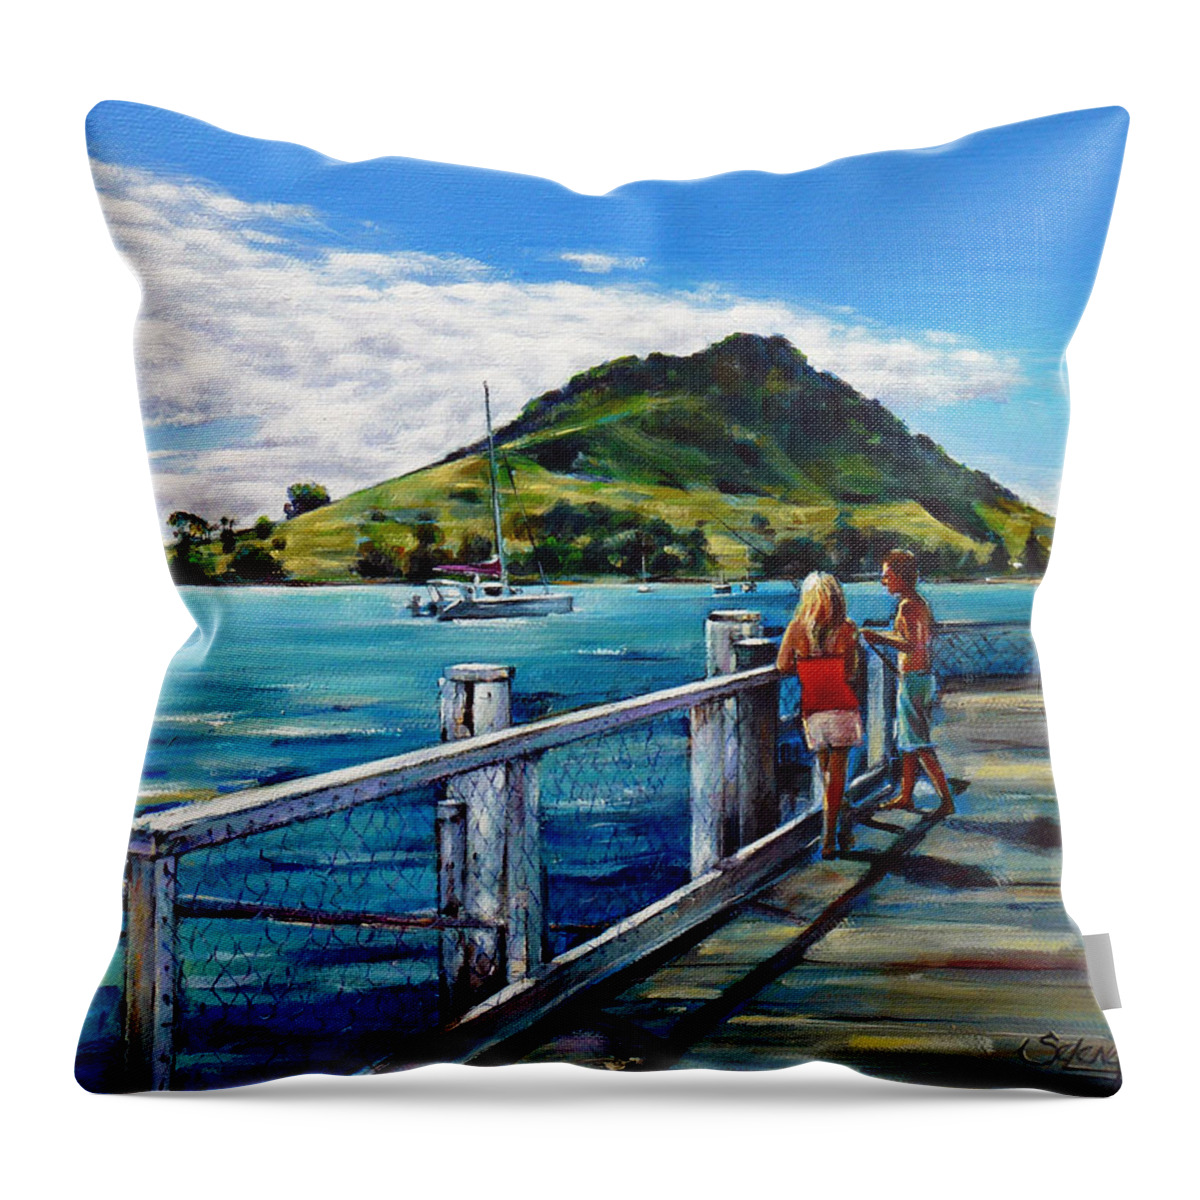 Pier Throw Pillow featuring the painting Mt Maunganui Pier 140114 by Selena Boron